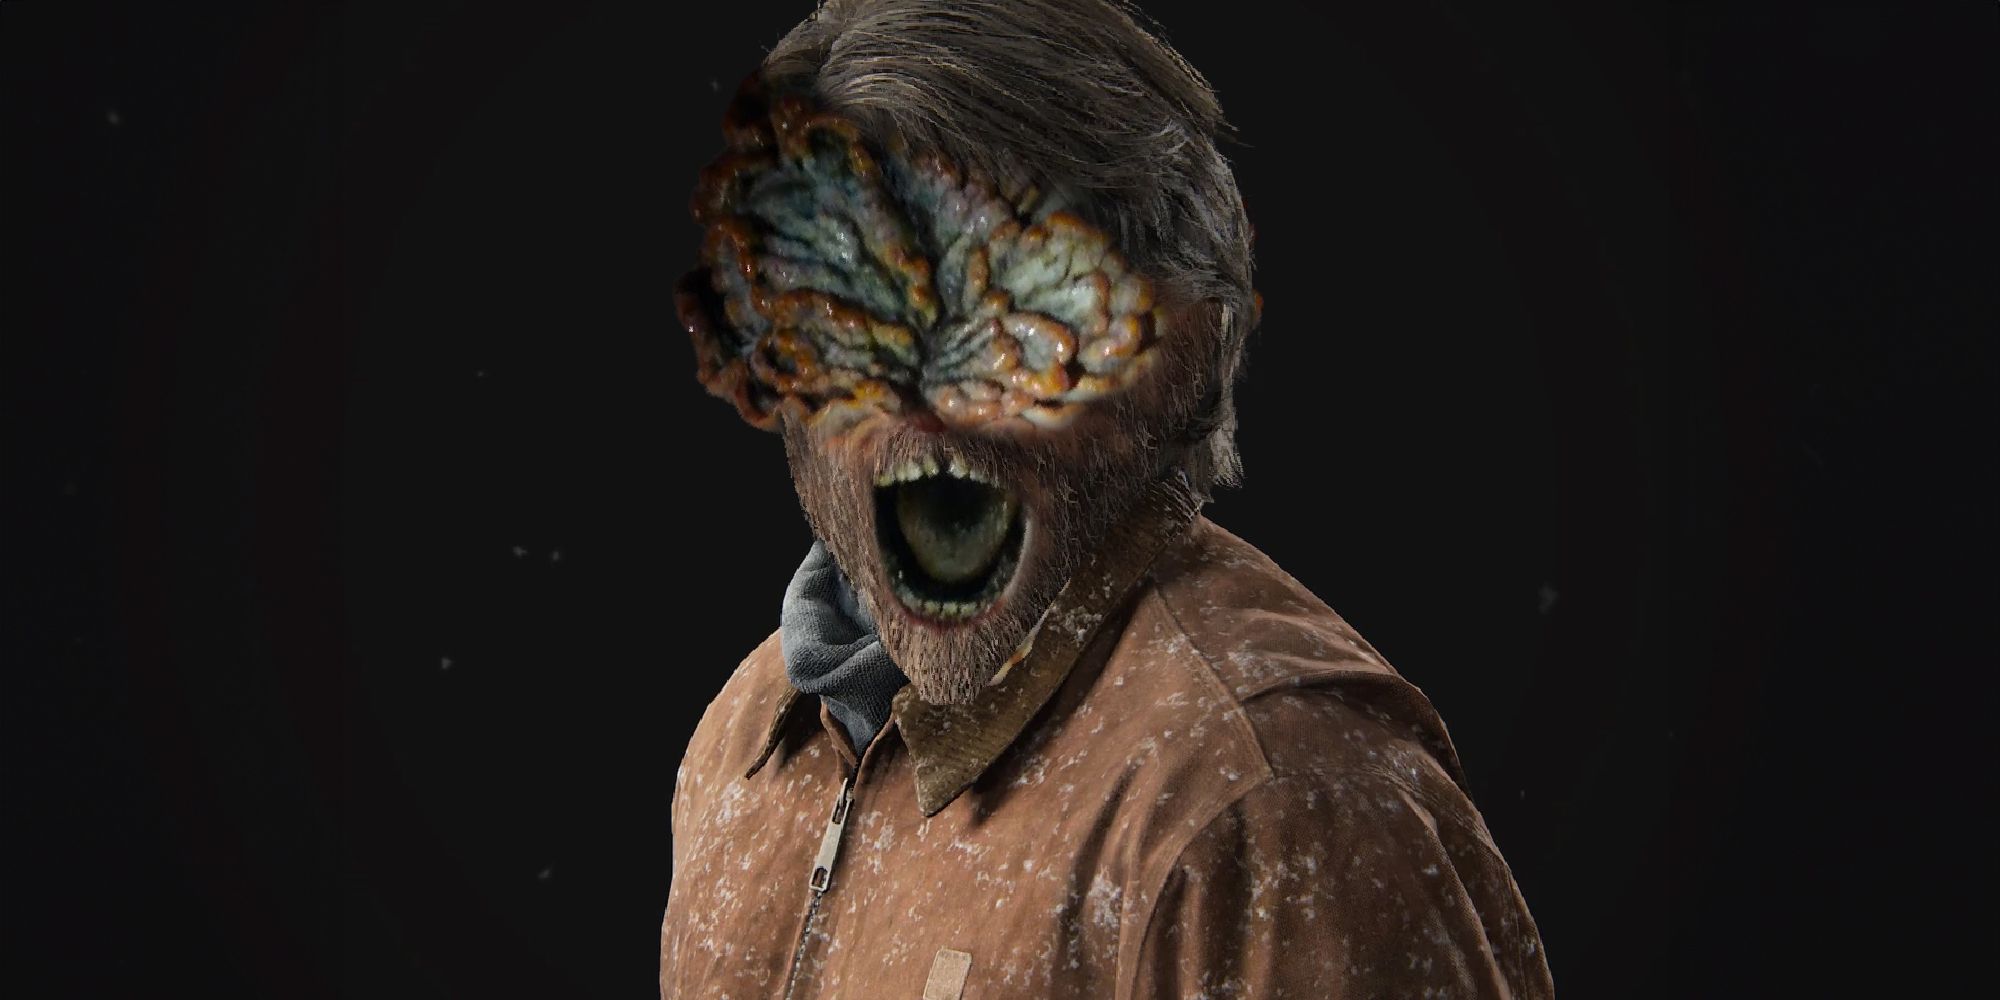 An image of Joel combined with a Clicker in The Last of Us.